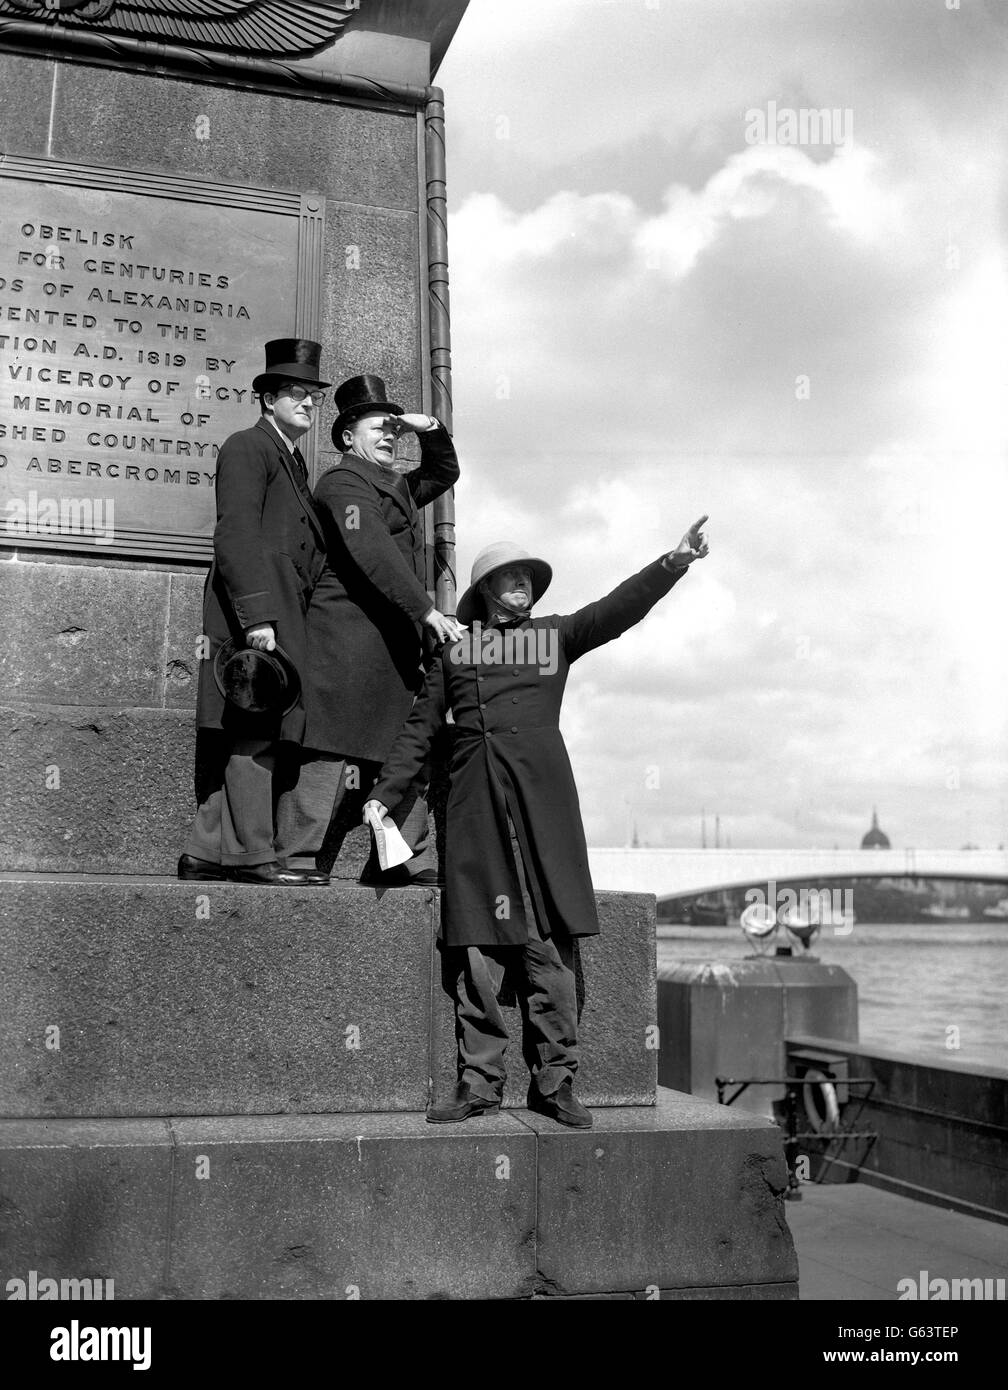 The Goons, (l-r) Peter Sellers, Harry Secombe and Spike Milligan, are standing on the plinth of Cleopatra's Needle, the obelisk that is one of the landmarks of the Embankment, London. They gave Londoners a treat with their comedy antics during recording for their programme 'The Reason Why'. Stock Photo